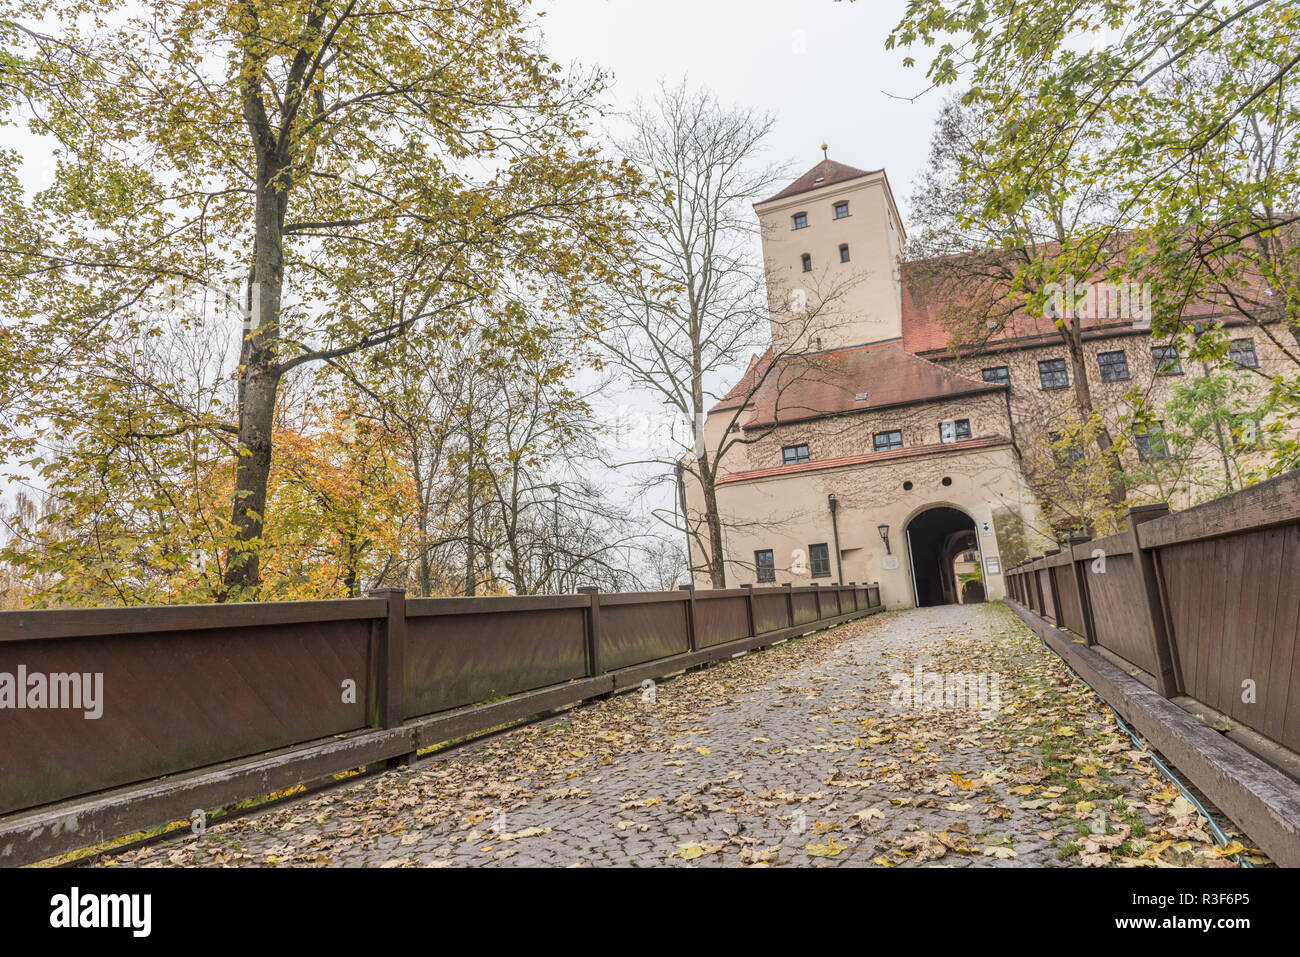 friedberger castle Stock Photo